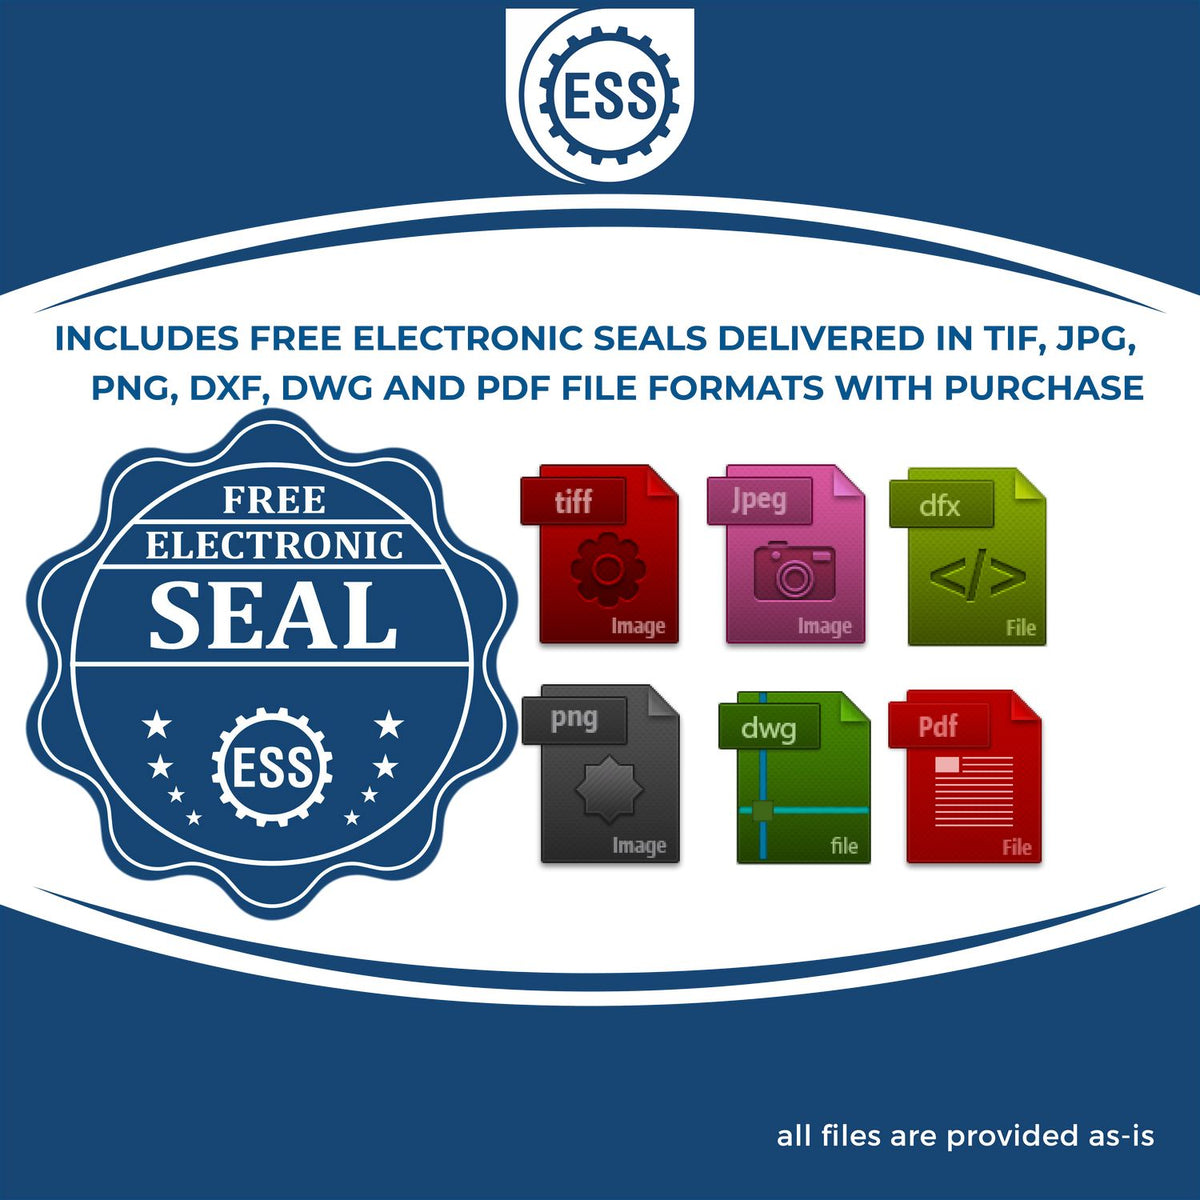 An infographic for the free electronic seal for the Heavy-Duty Kansas Rectangular Notary Stamp illustrating the different file type icons such as DXF, DWG, TIF, JPG and PNG.